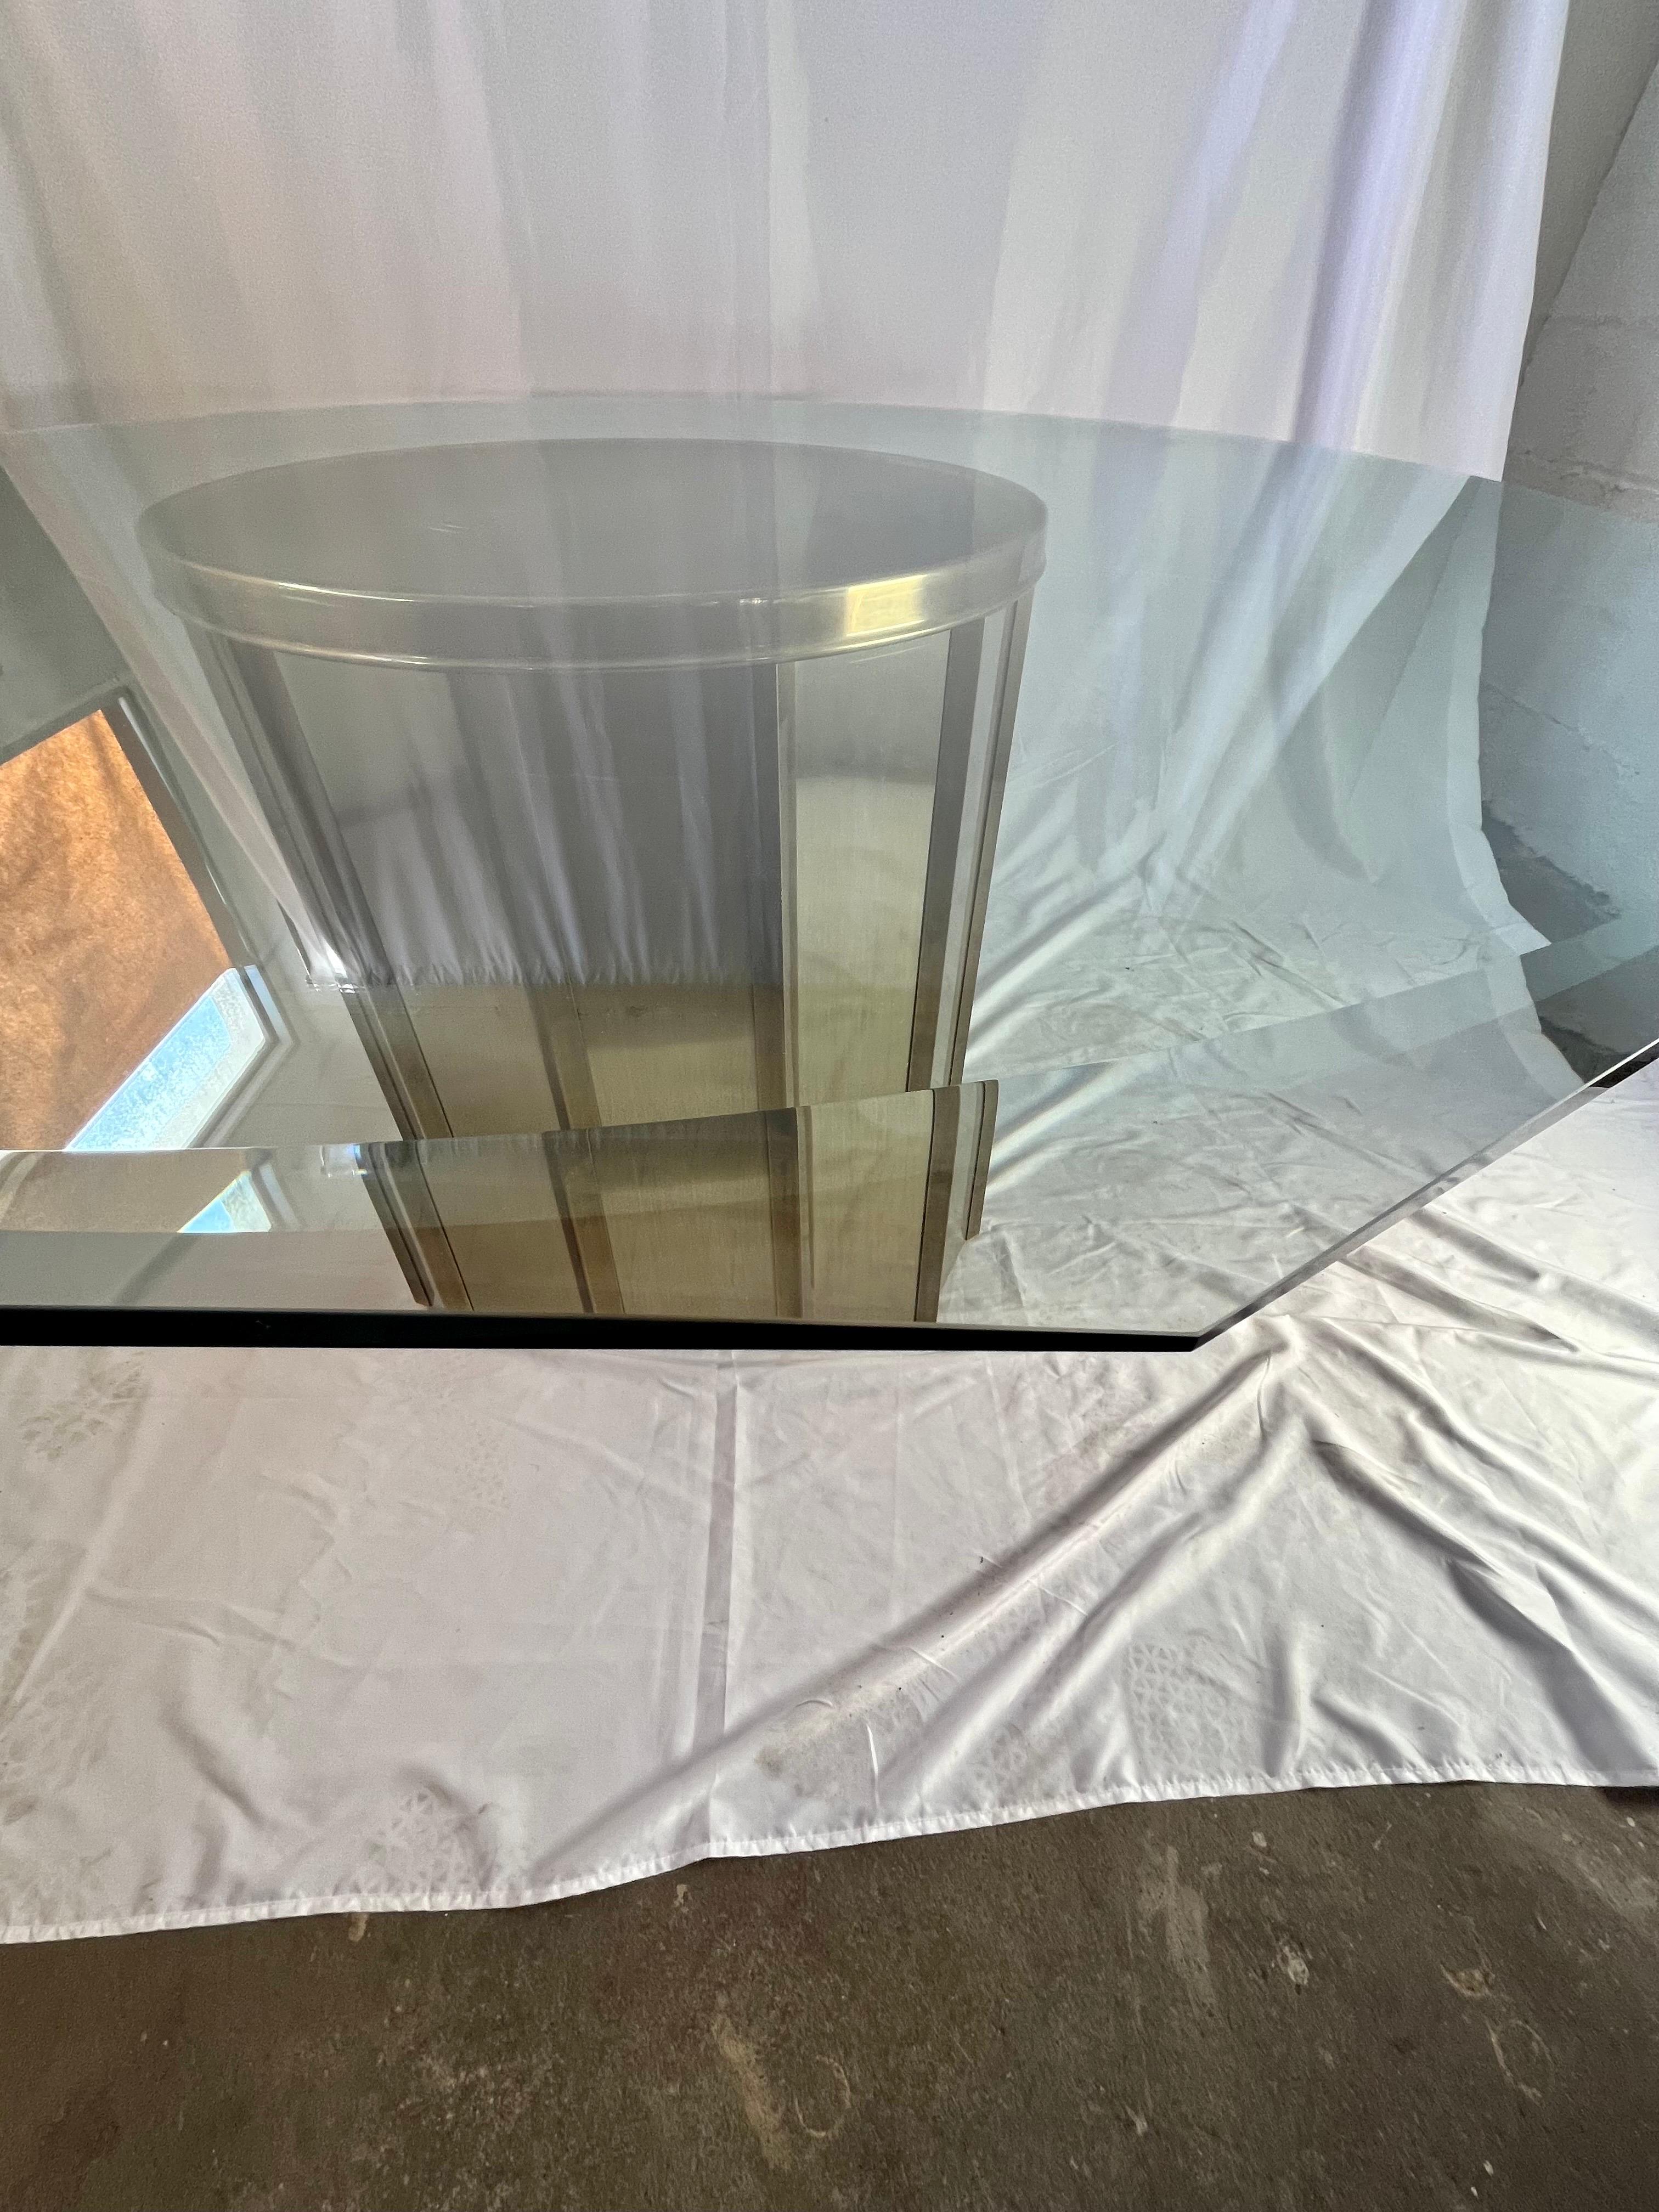 Mastercraft Dining Table Brass Drum Beveled Glass In Good Condition For Sale In W Allenhurst, NJ